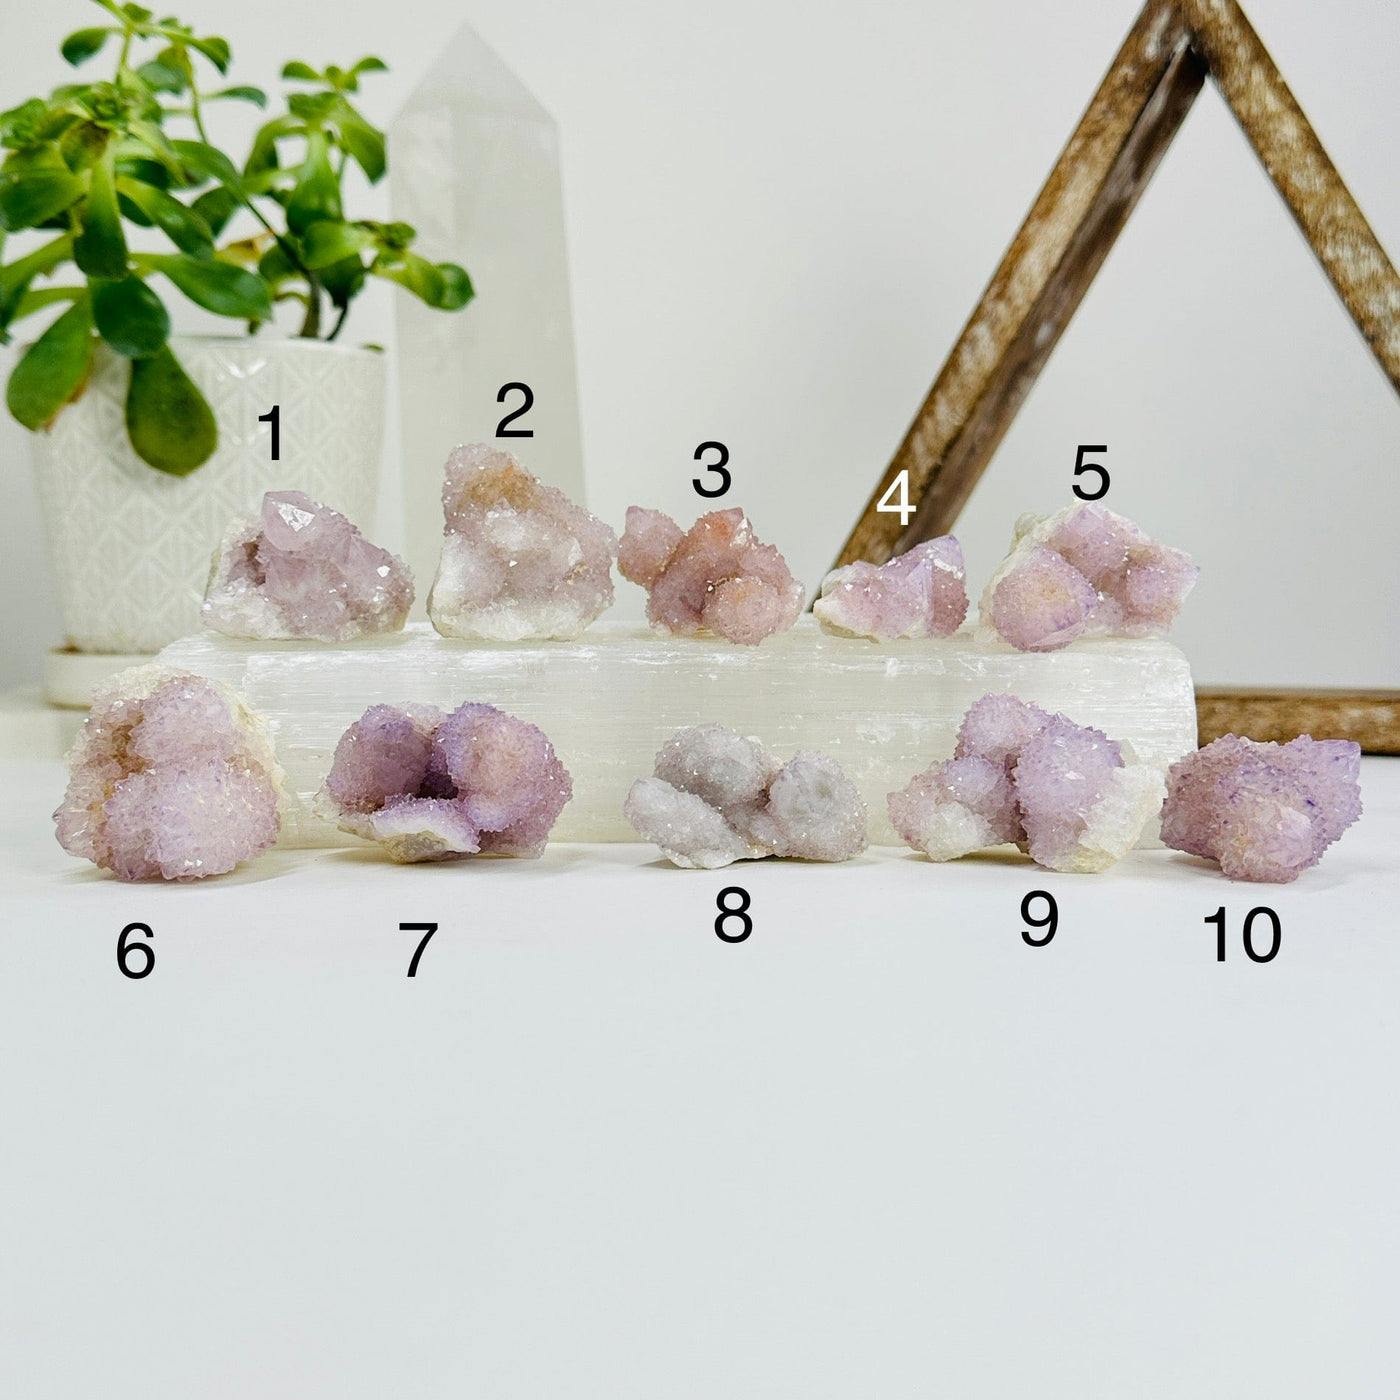 variants 1-10 of spirit quartz with decorations in the background